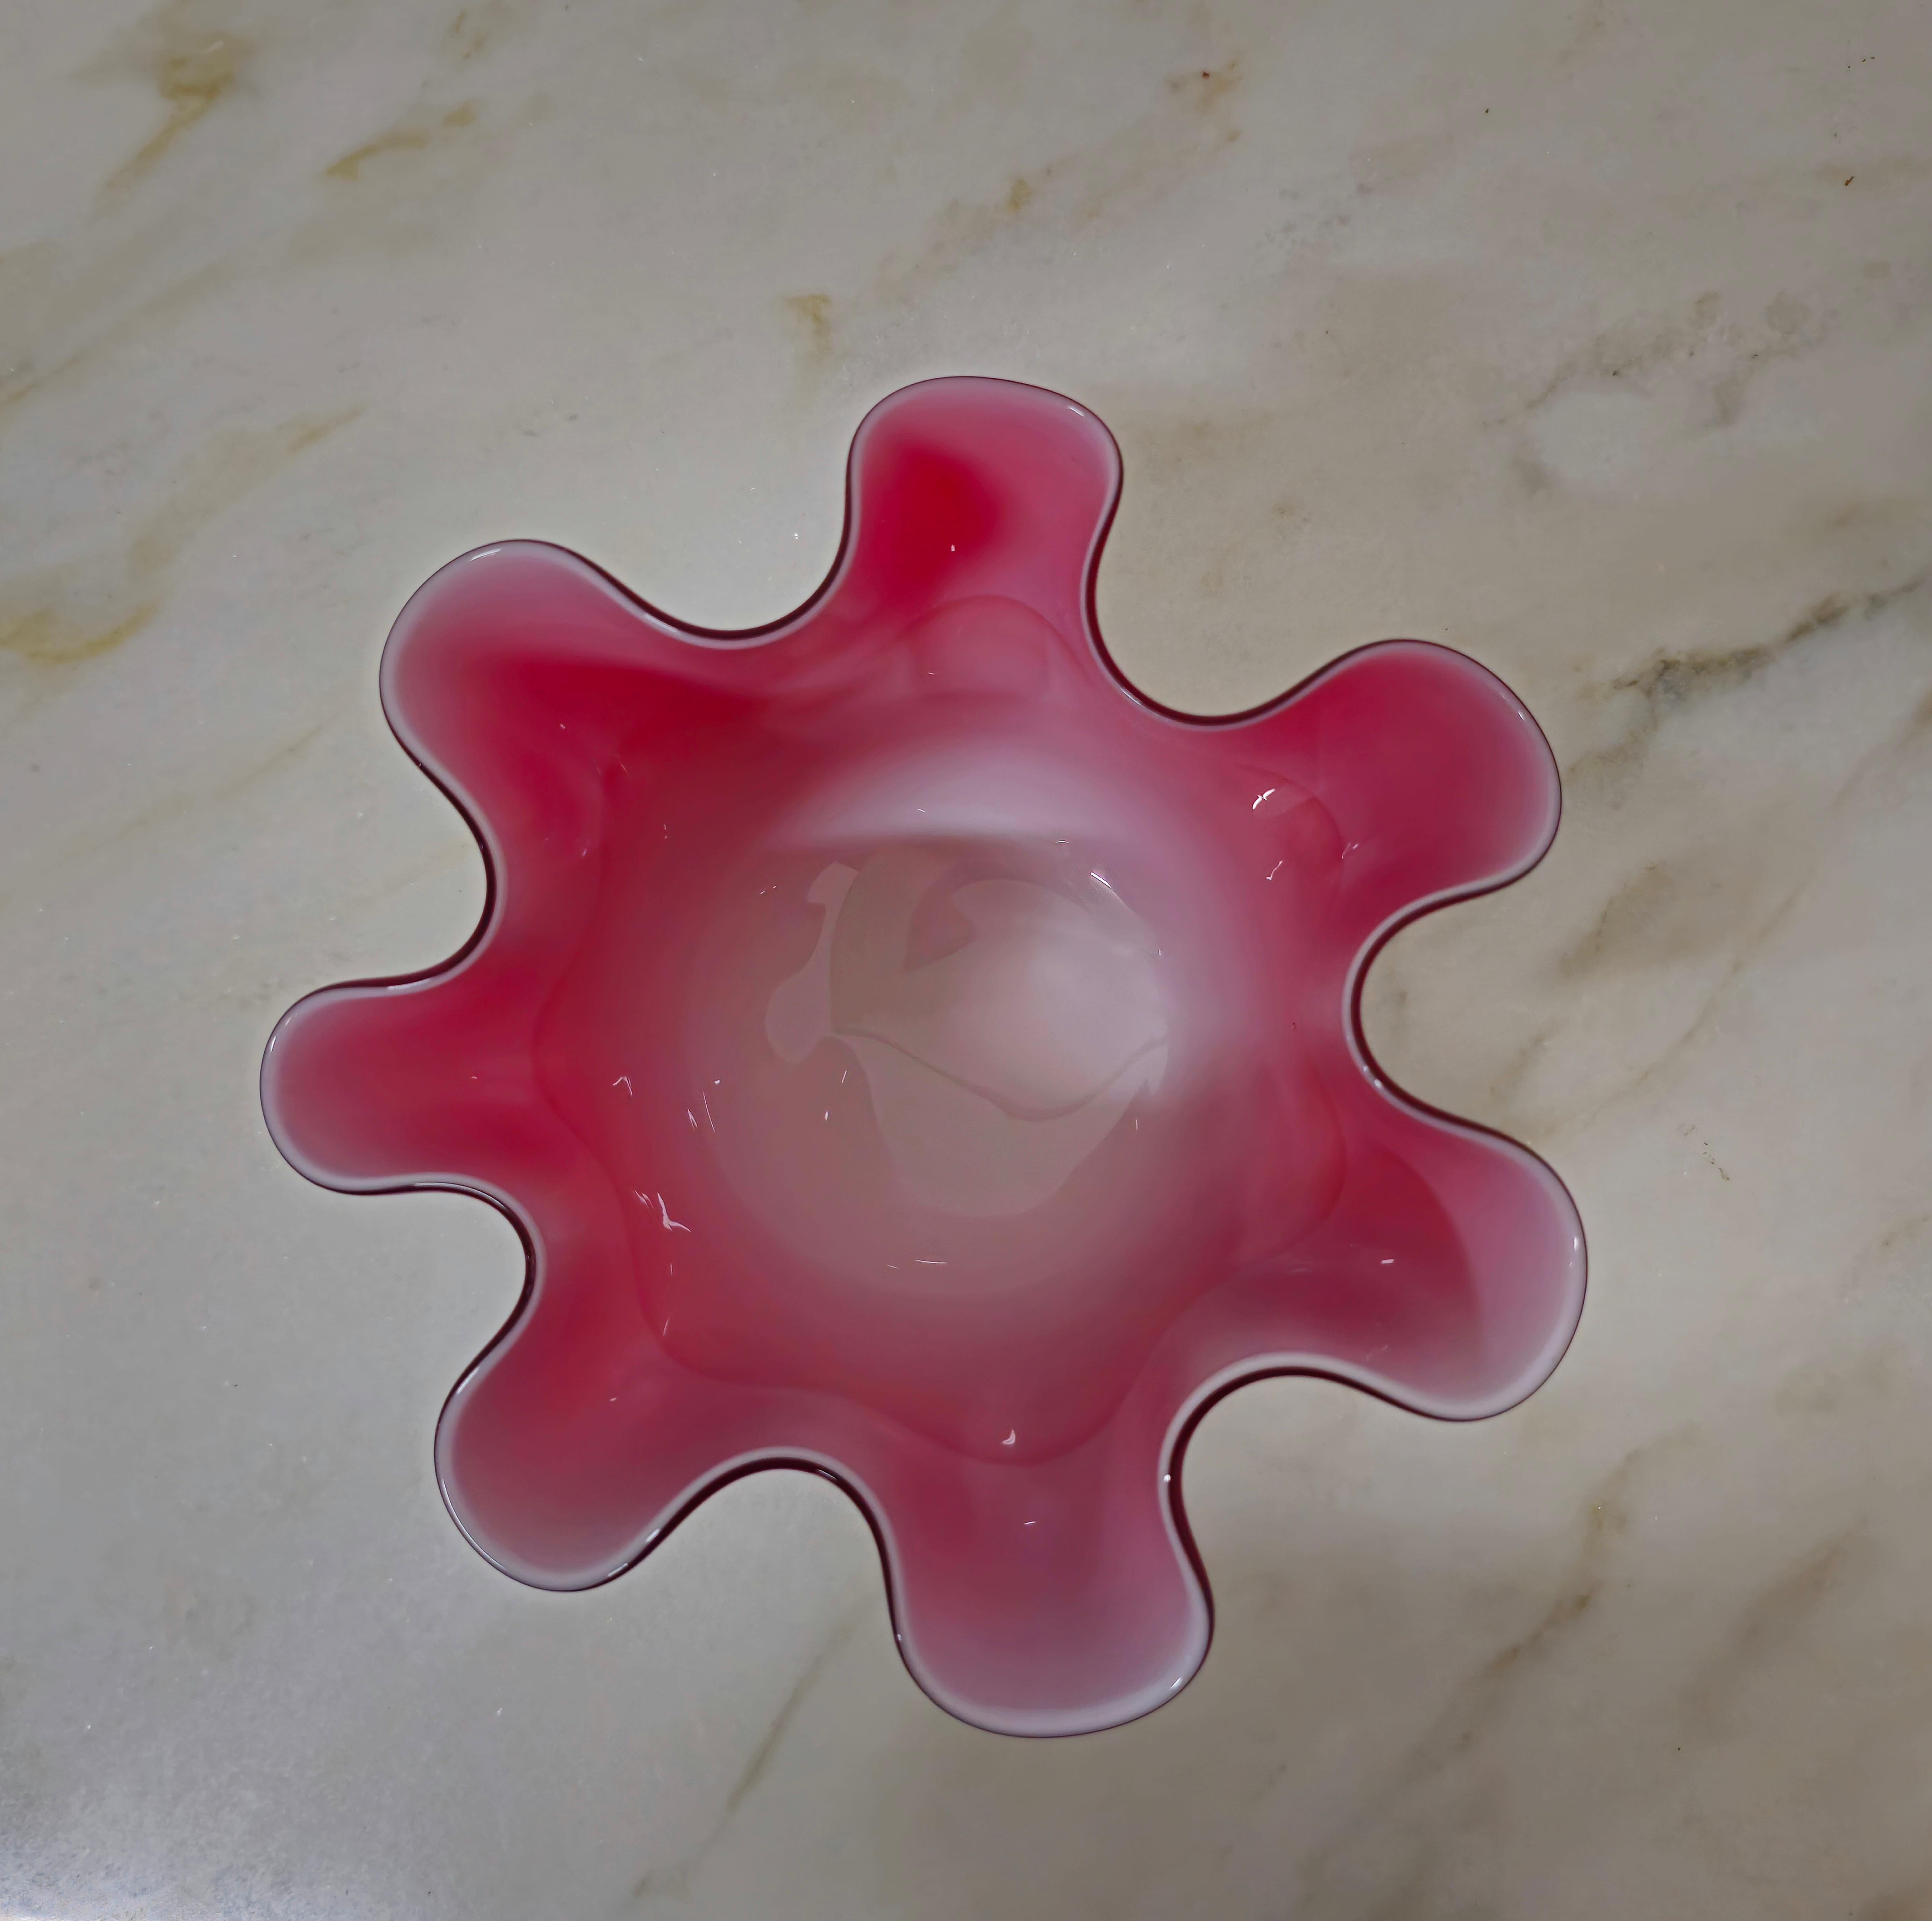 Decorative Object Vase Red Murano Glass Handkerchief Midcentury Italy 1980s For Sale 1